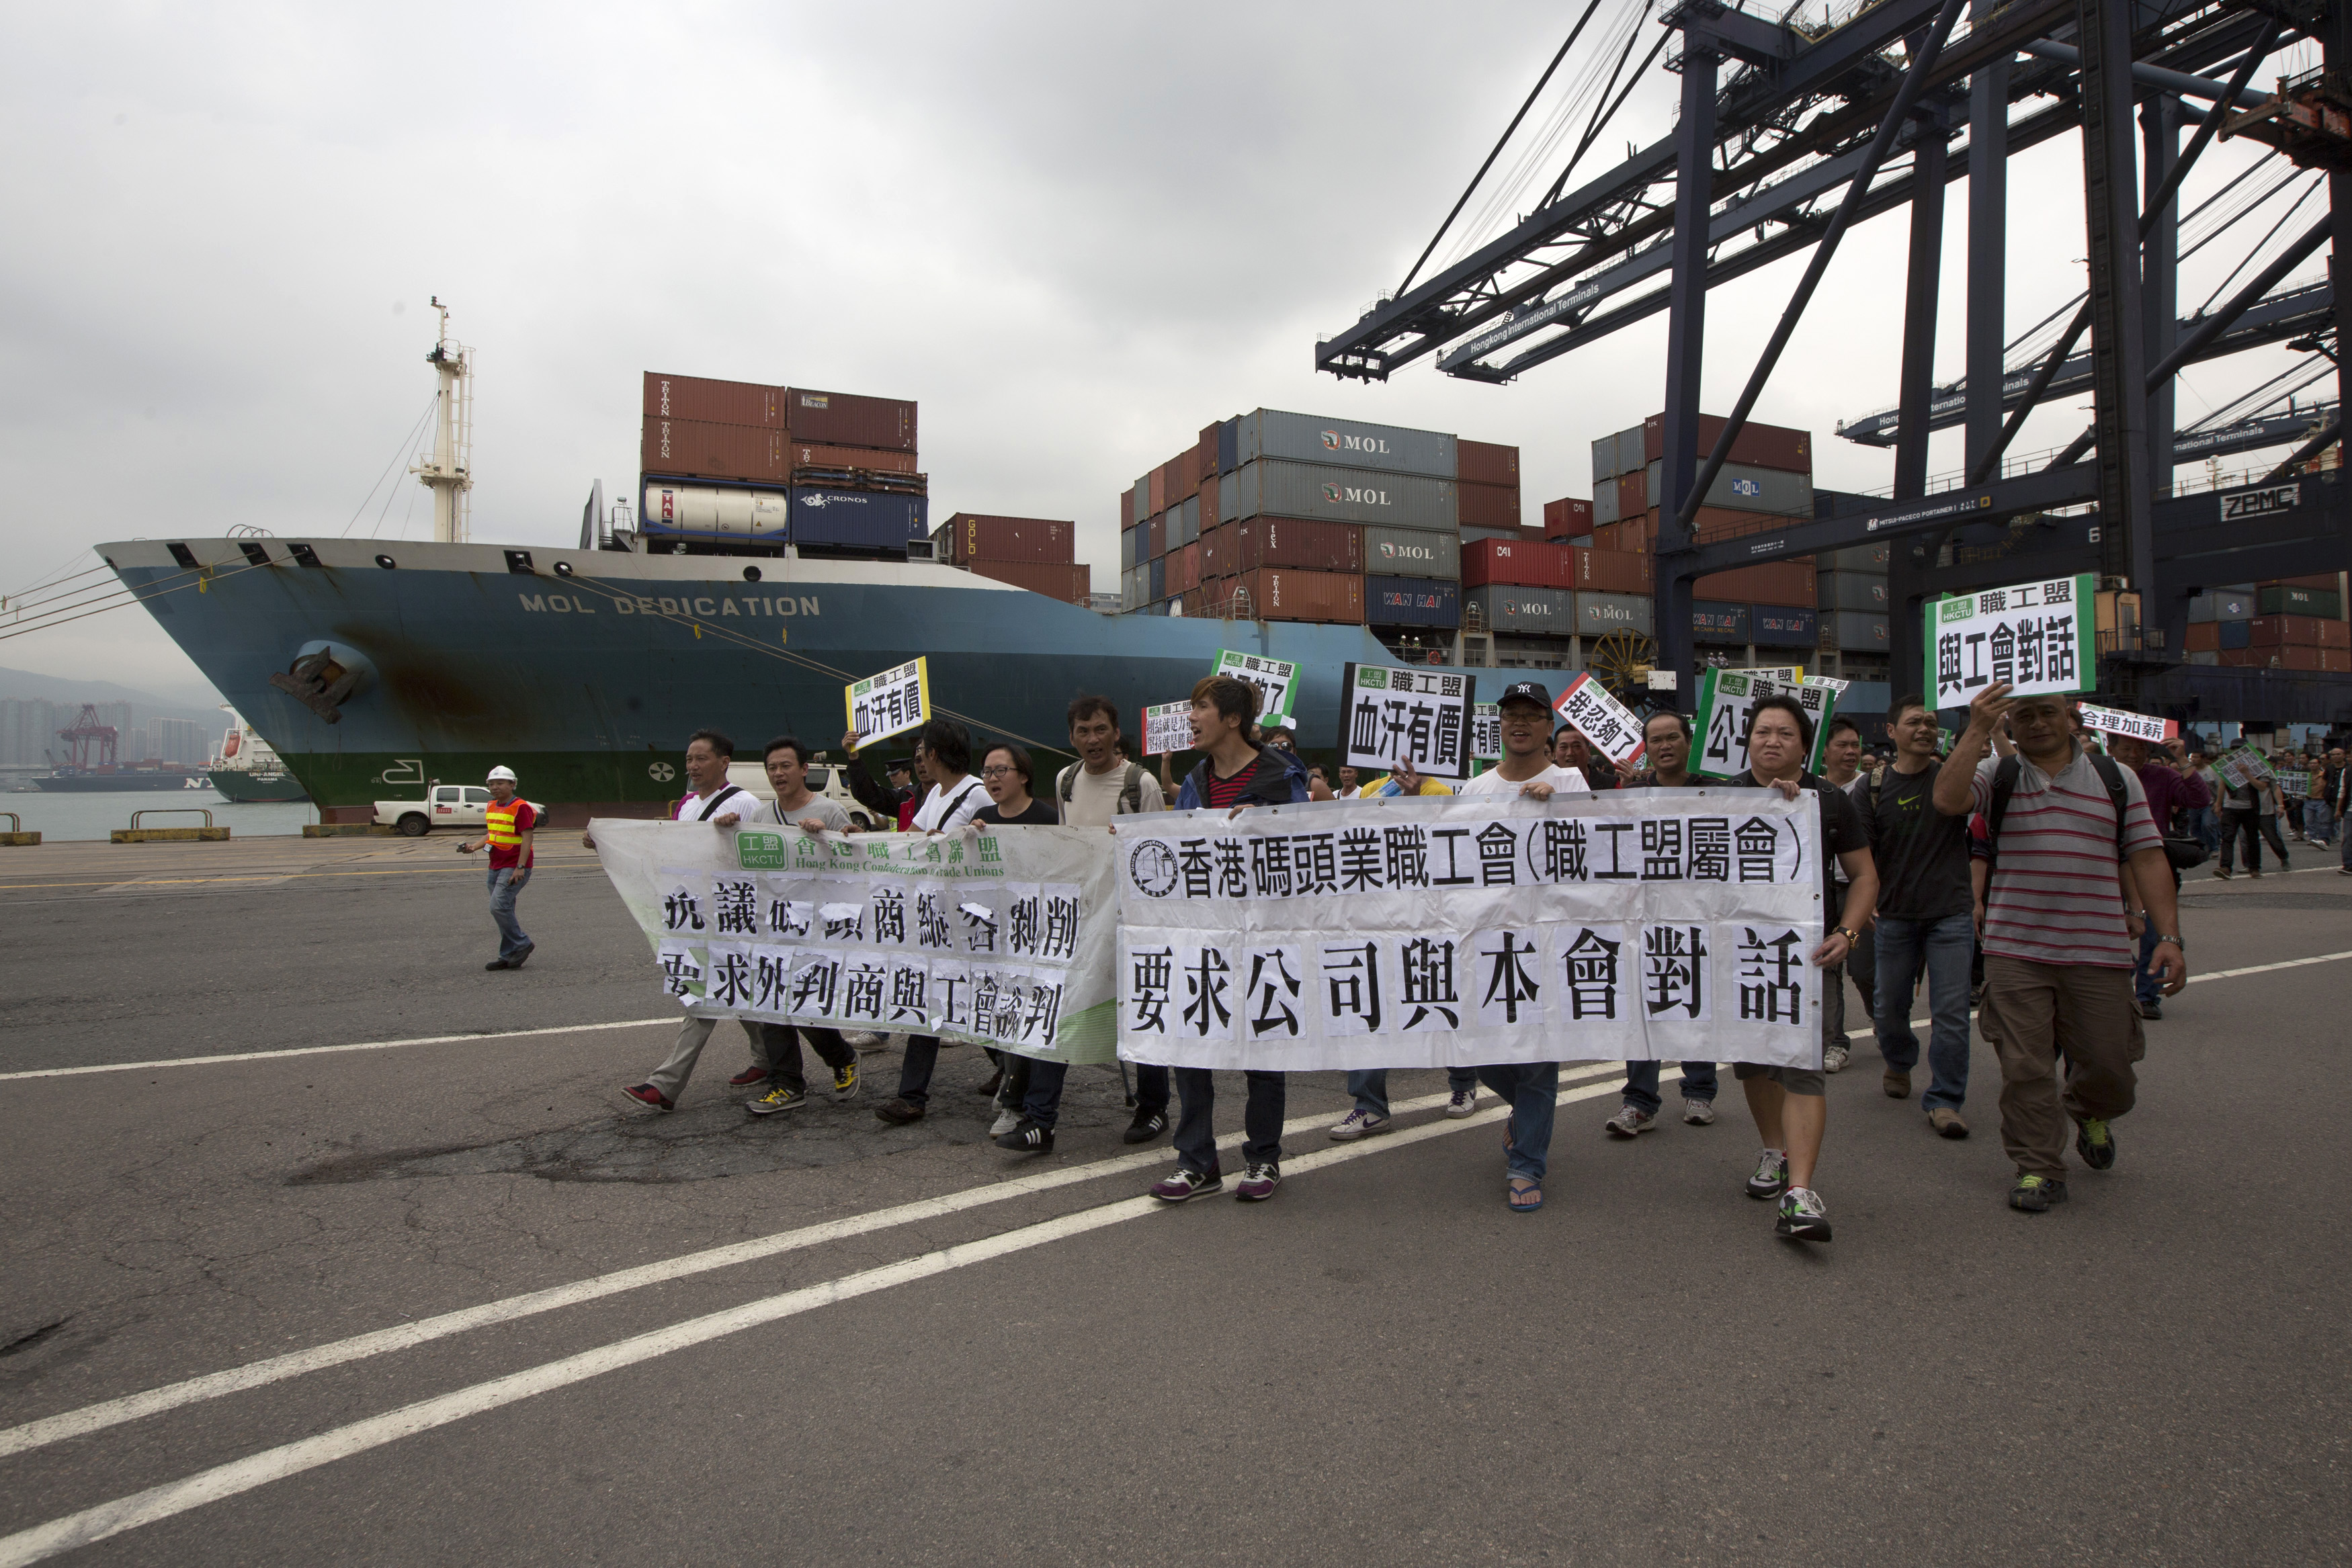 Dockworkers march during a strike at Kwai Chung container terminal, which is operated by Hong Kong International Terminals Ltd., in Hong Kong on March 29, 2013 (Tyrone Siu—Reuters)